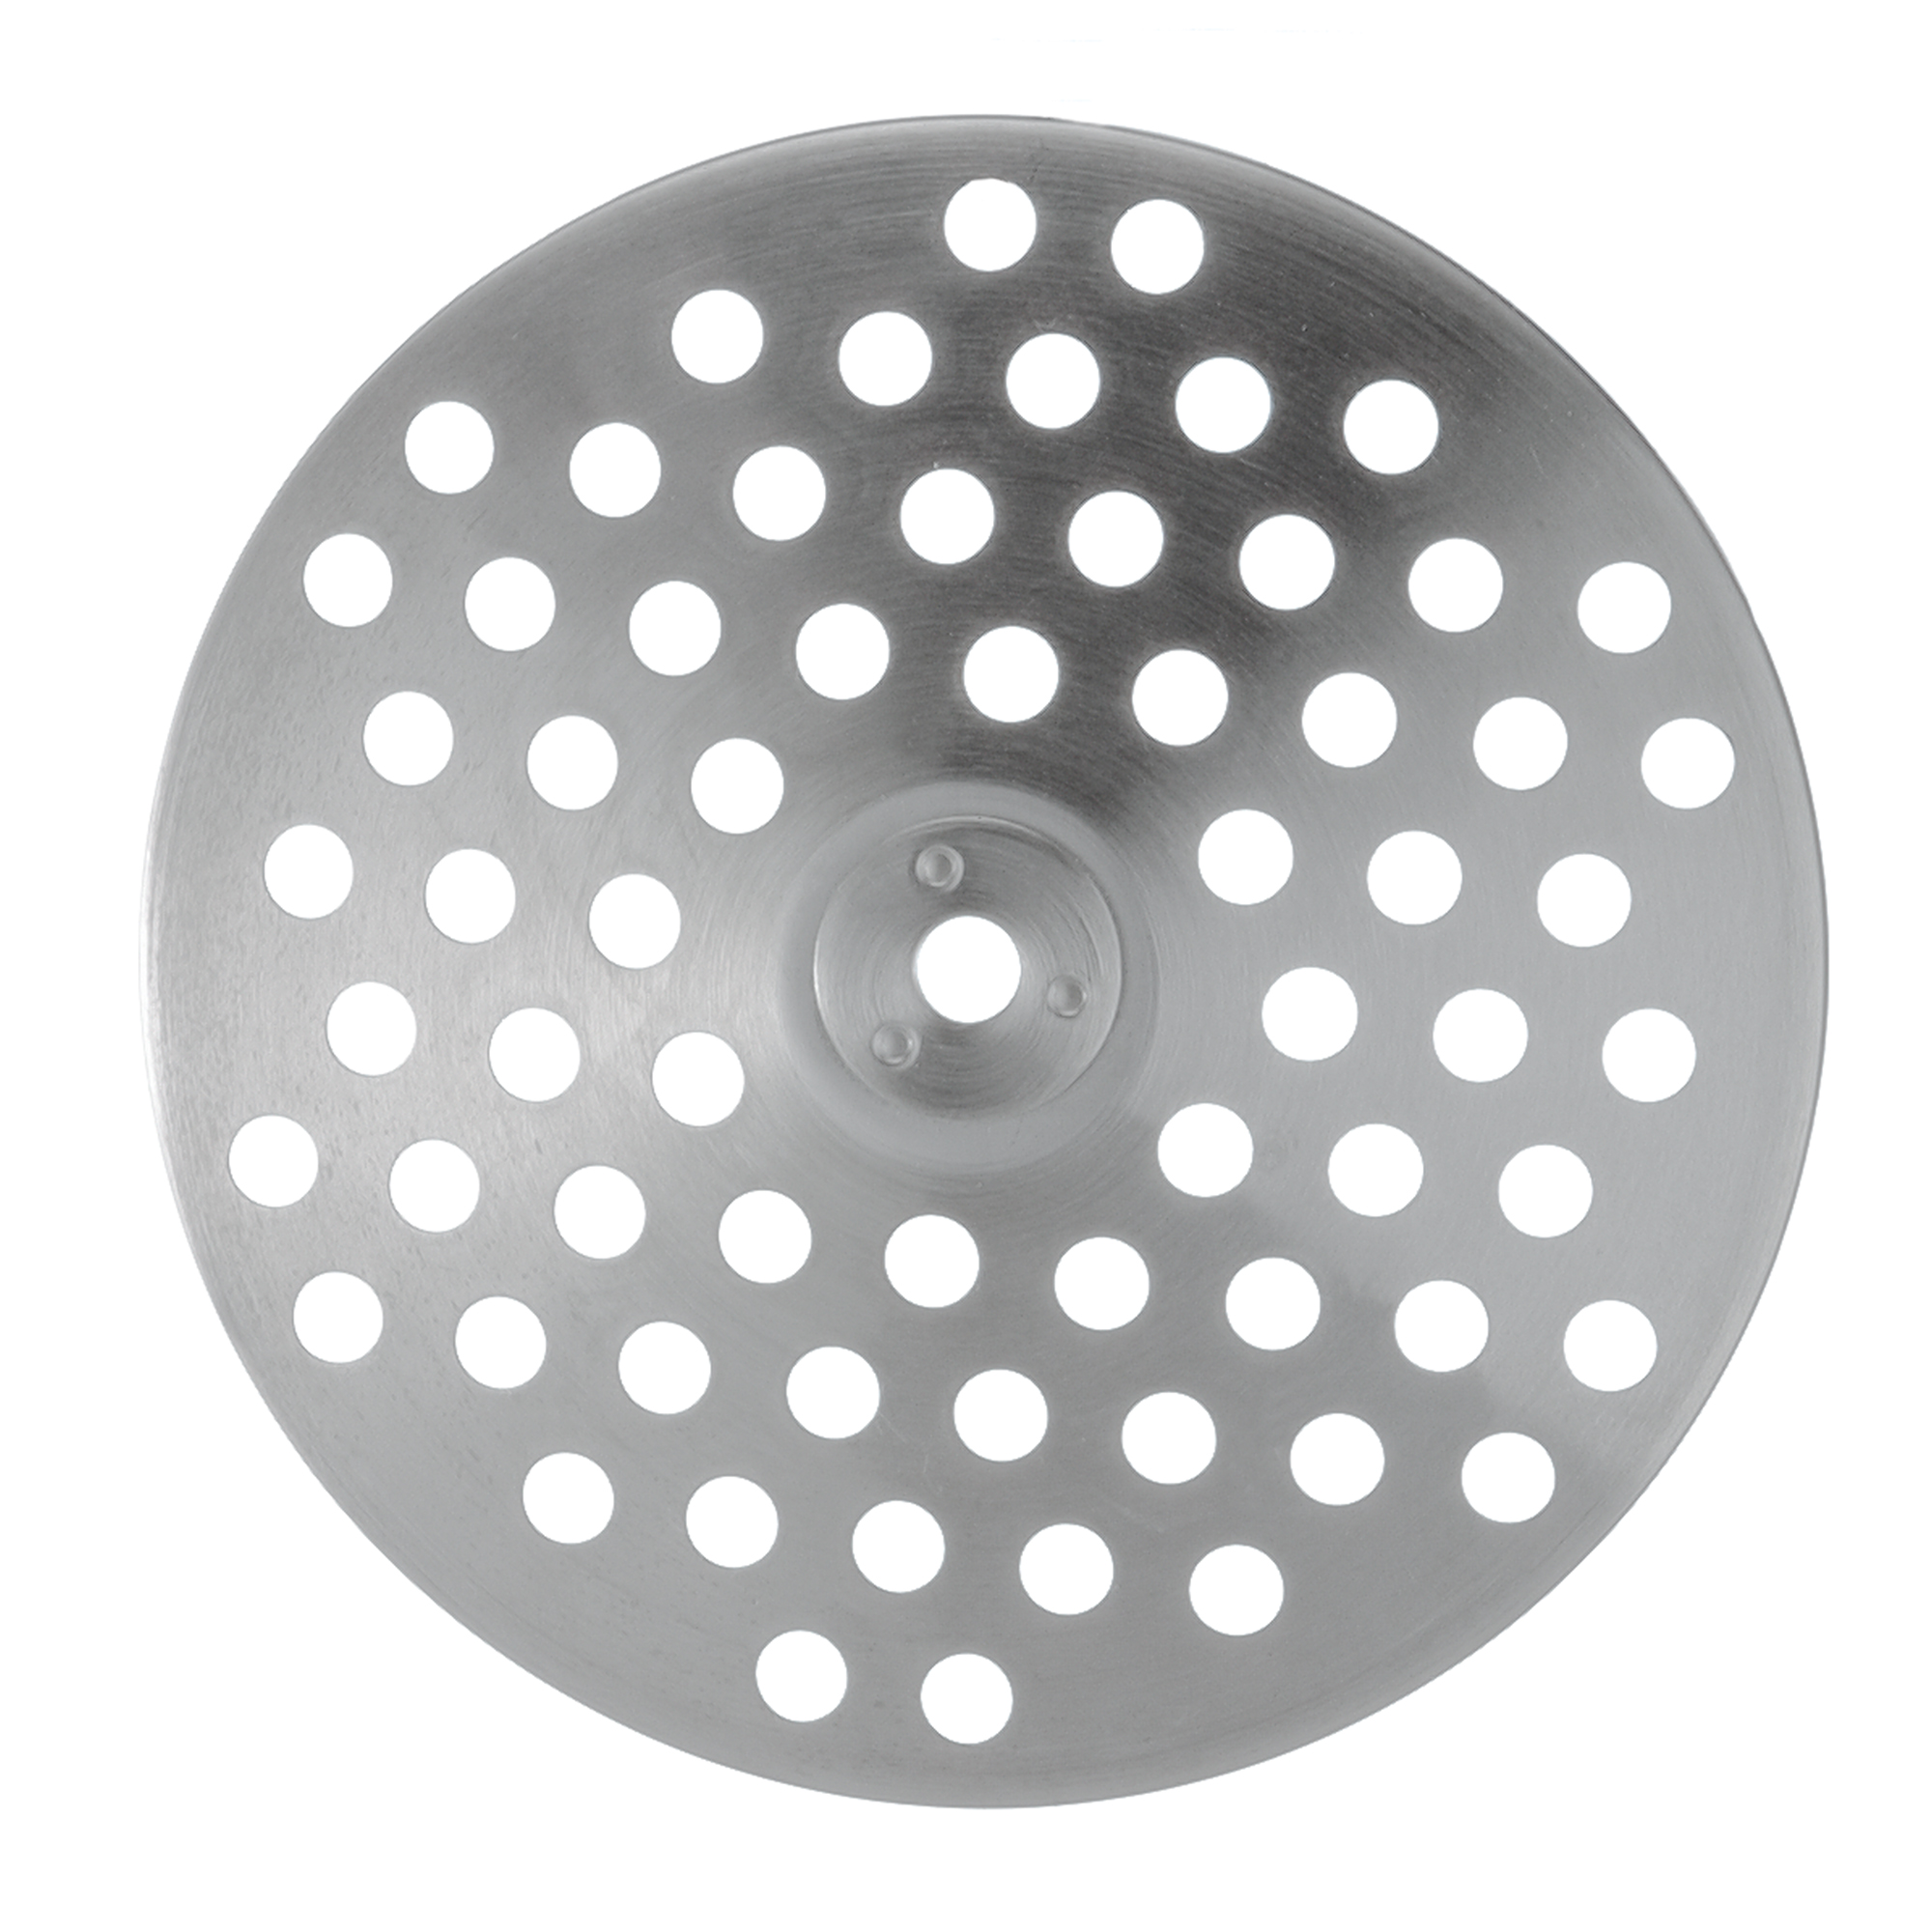 Sieve Disc 8 mm/0.3 in. (for Item no. 16251 & 16252)